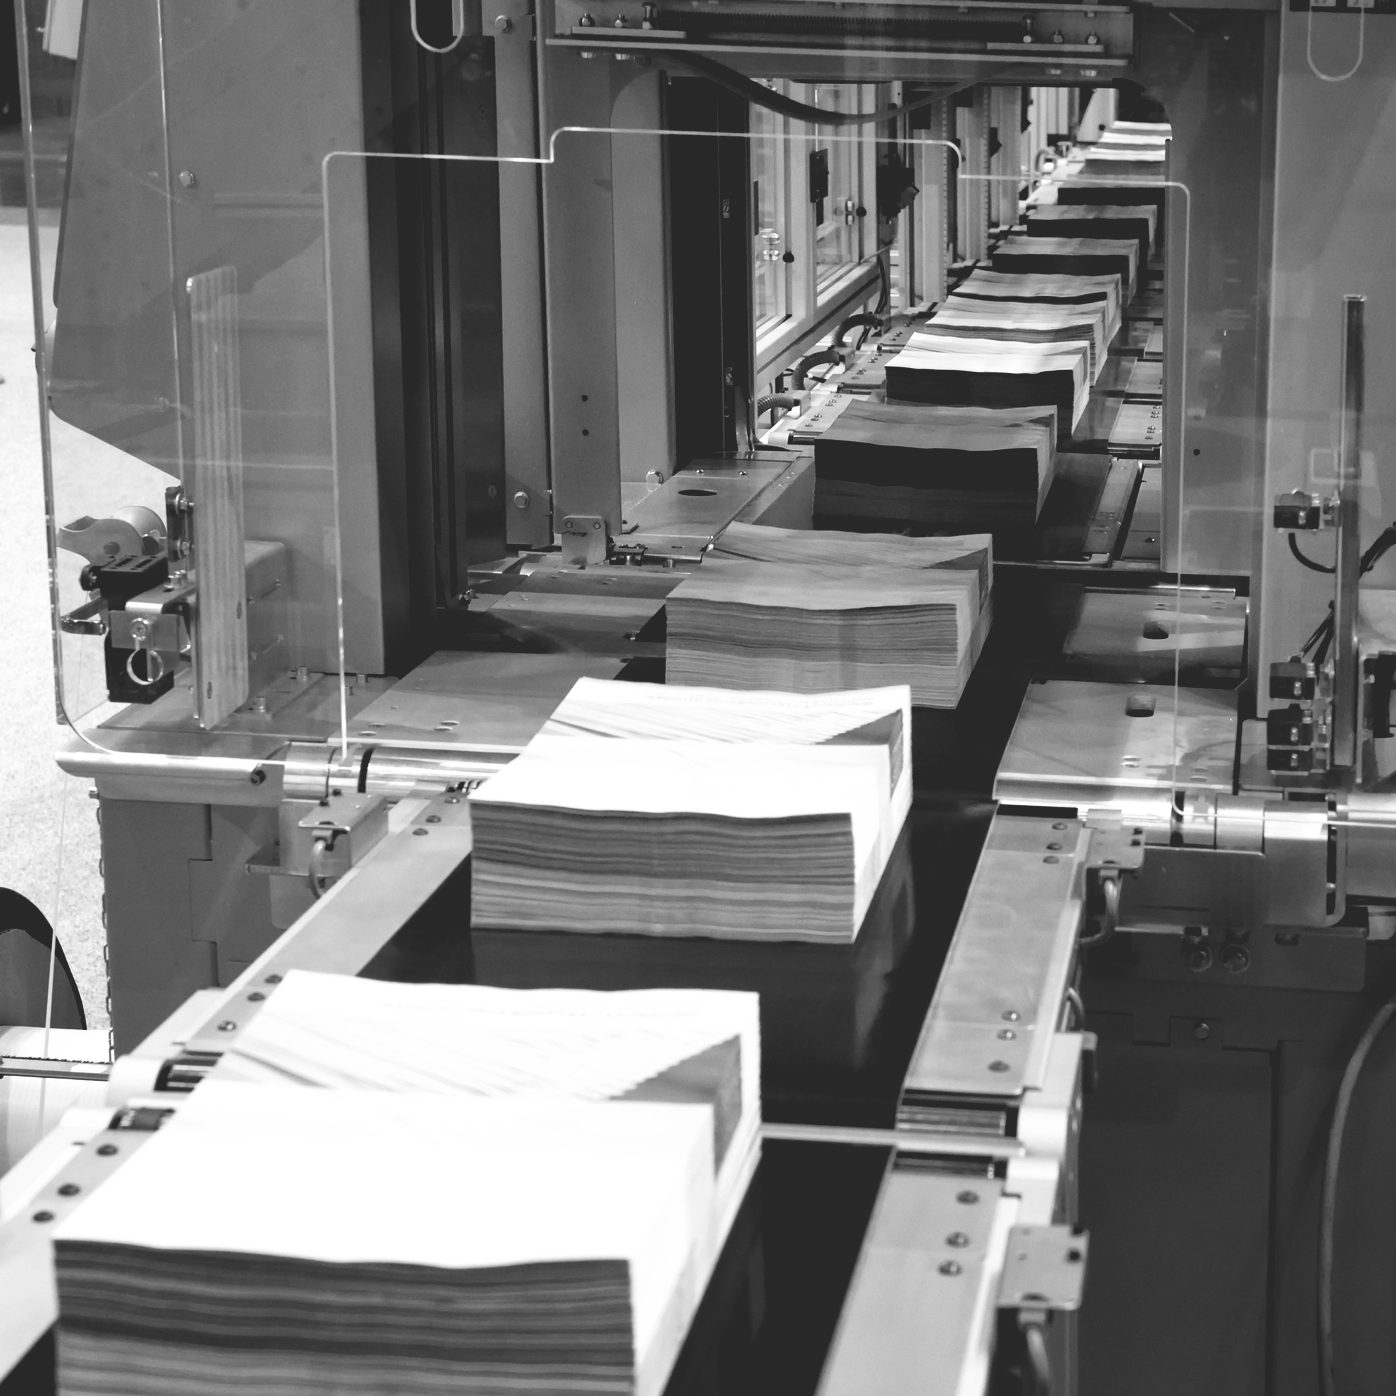 Conveyor belt with stacks of pages on it in black and white